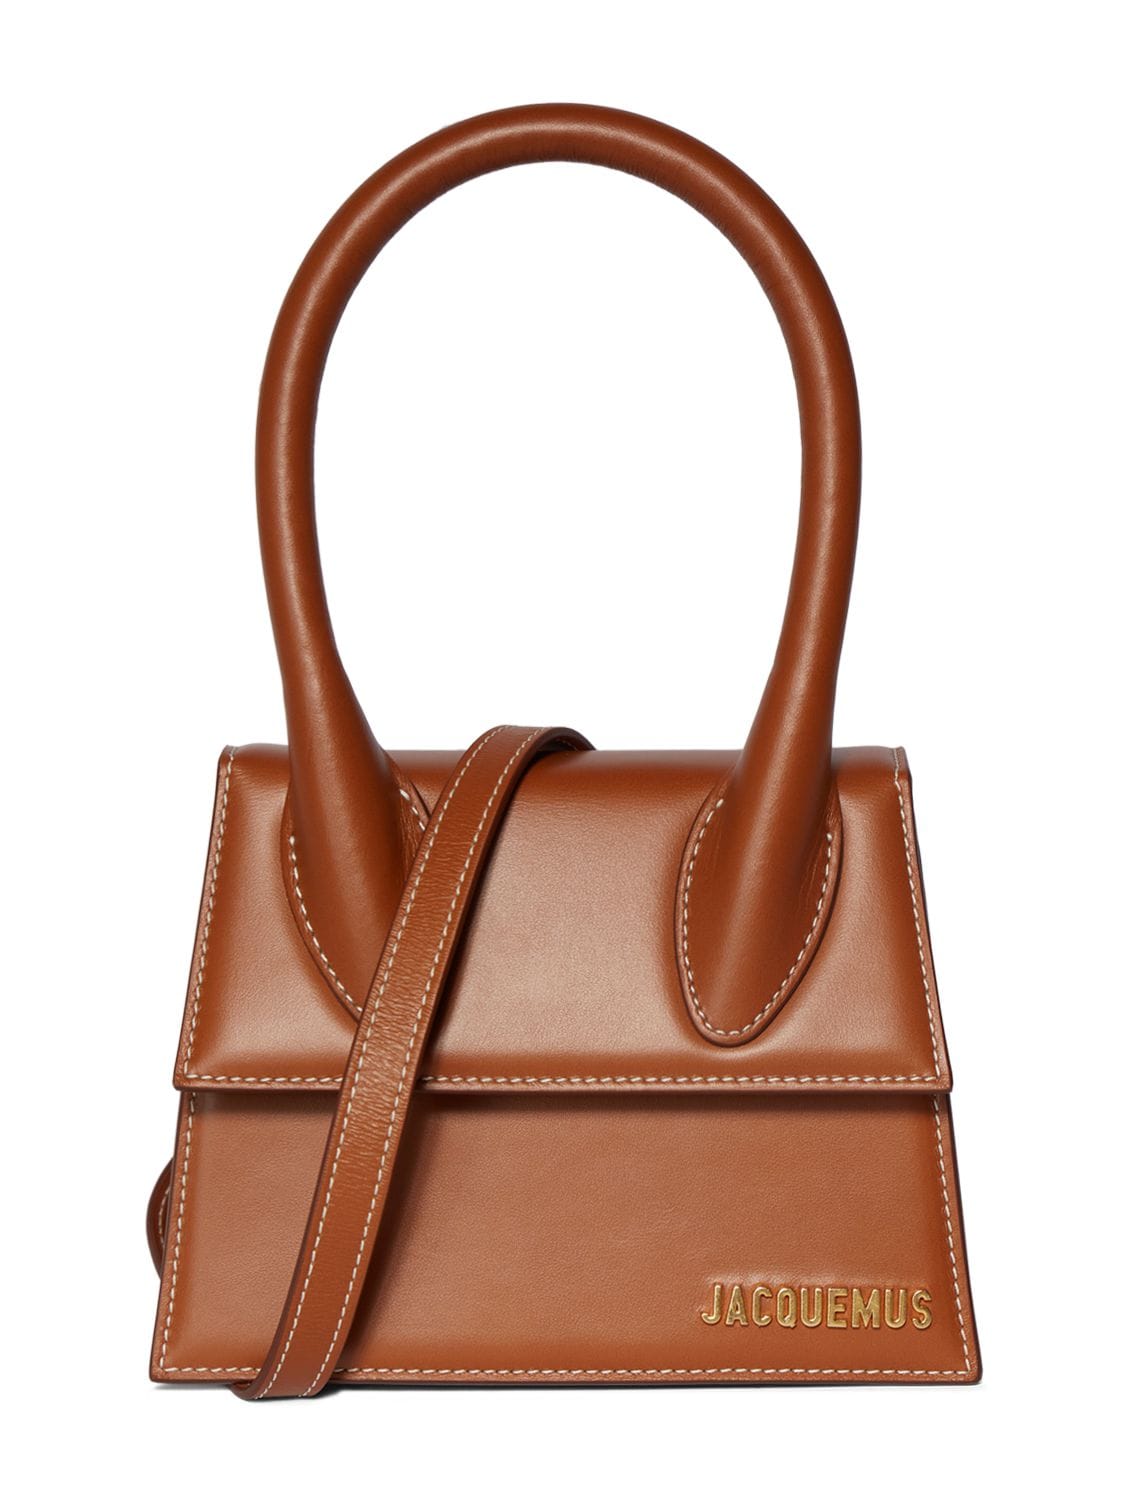 Jacquemus Le Chiquito Moyen Leather Top Handle Bag In Light Brown